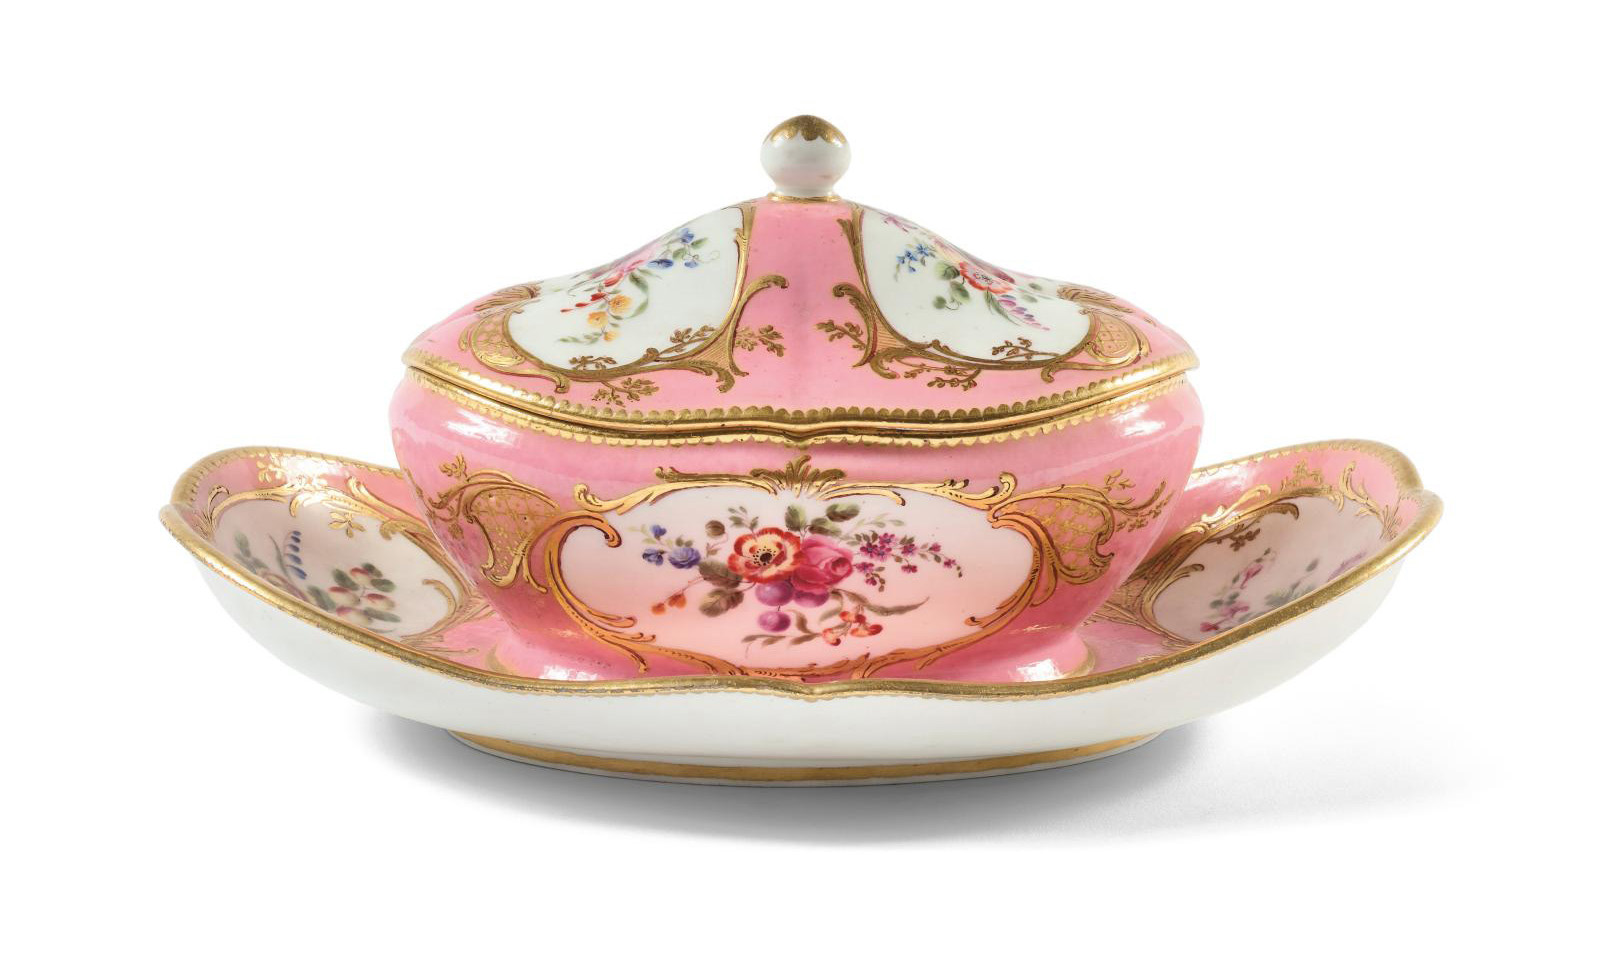 Between December 1758 and January 1759, the merchant Lazare Duvaux delivered the distinctively pink “Richelieu service” to the maréchal-du